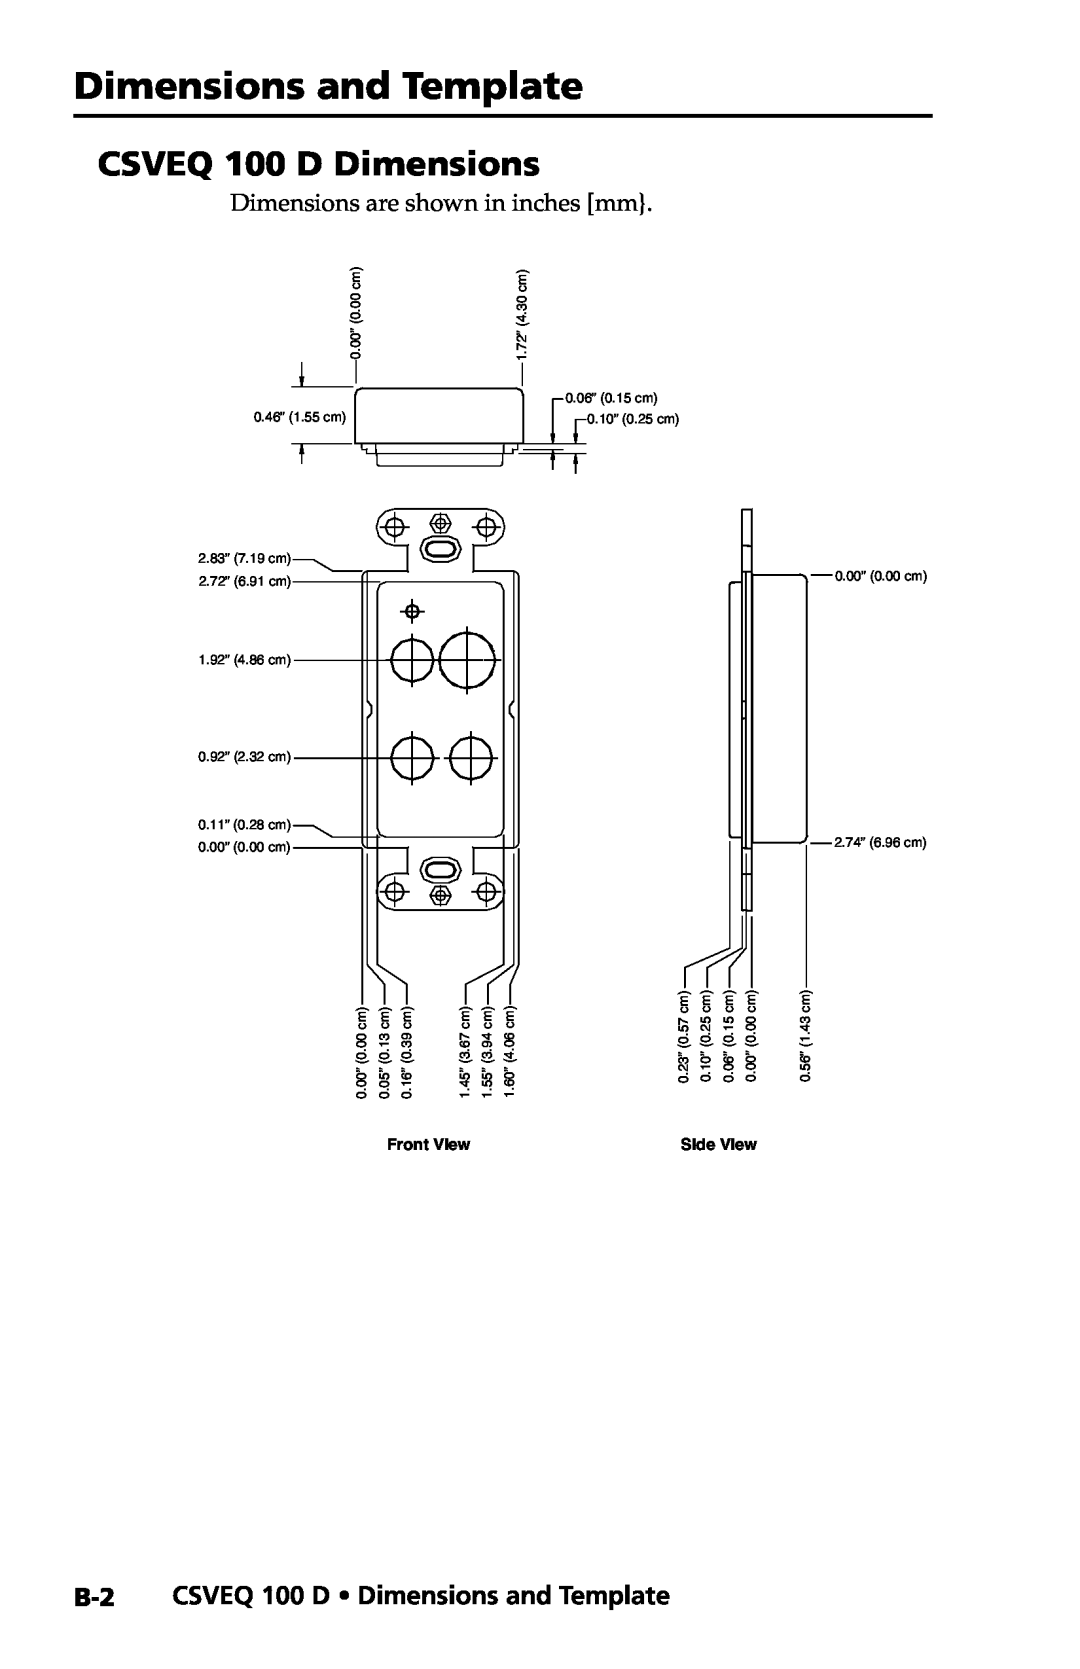 Extron electronic user manual B-2 CSVEQ 100 D Dimensions and Template, Front View, Side View 